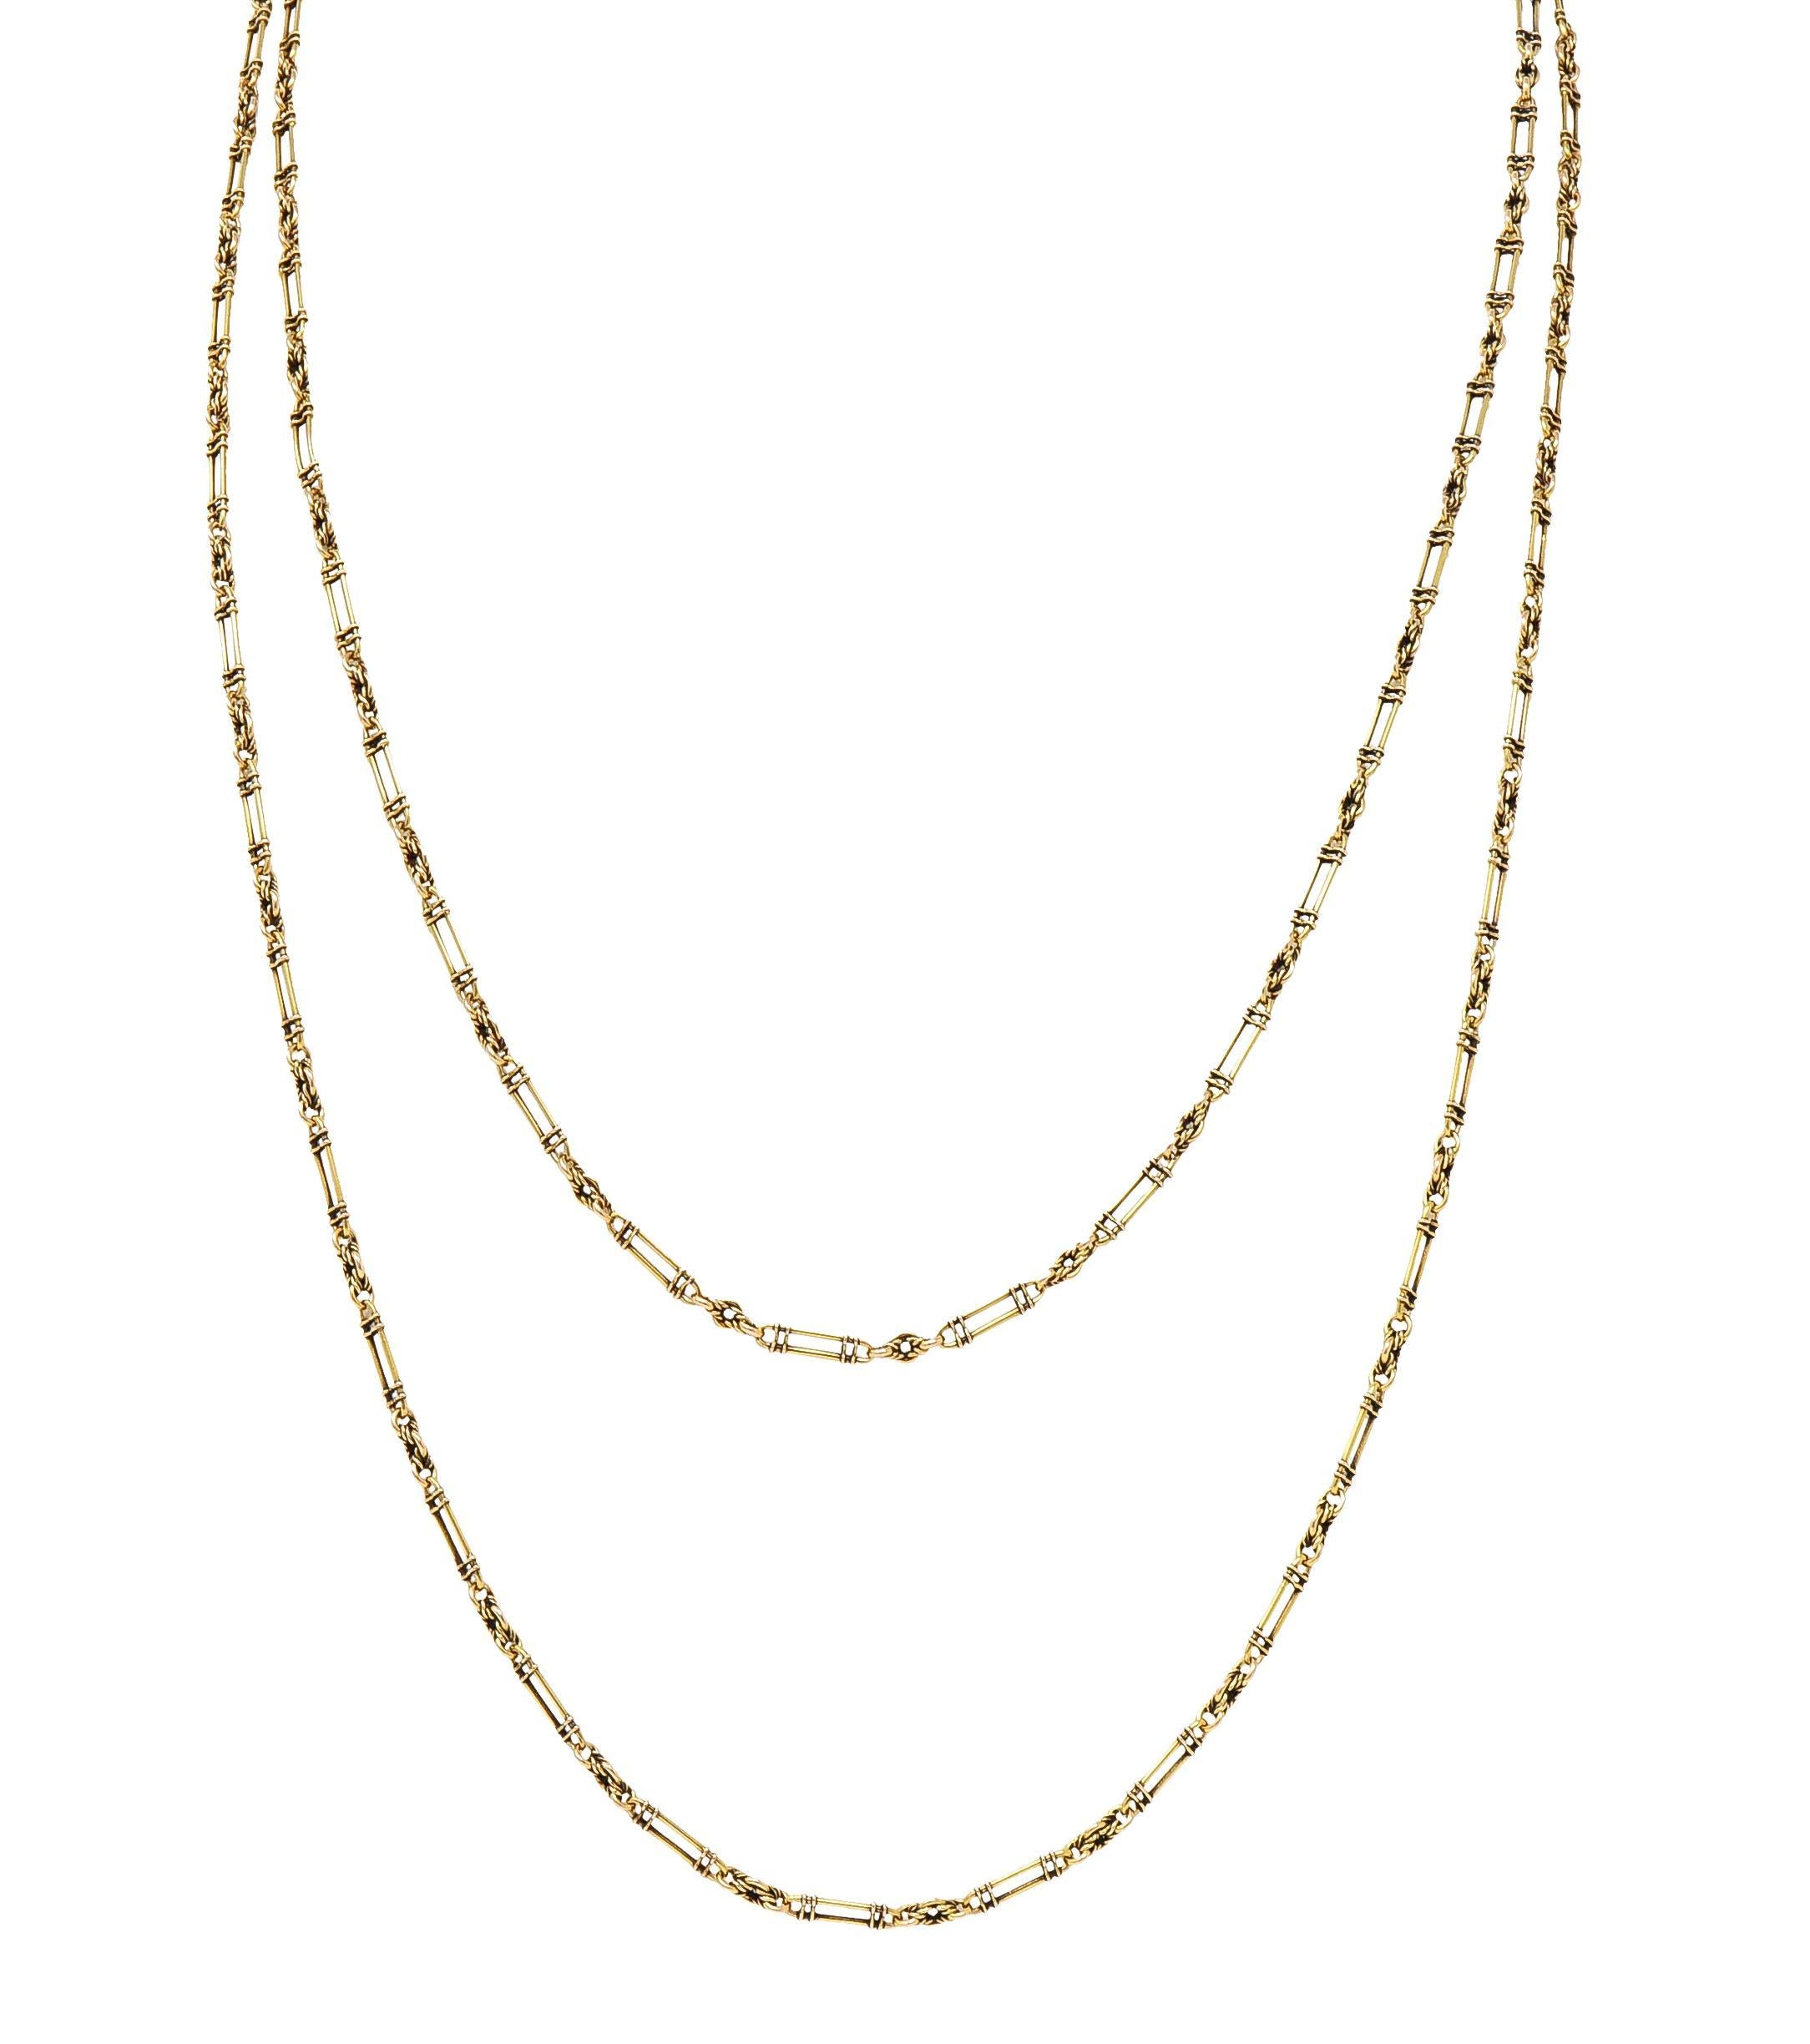 Victorian 15 Karat Yellow Gold Elongated Oval Link Antique Chain Necklace For Sale 6